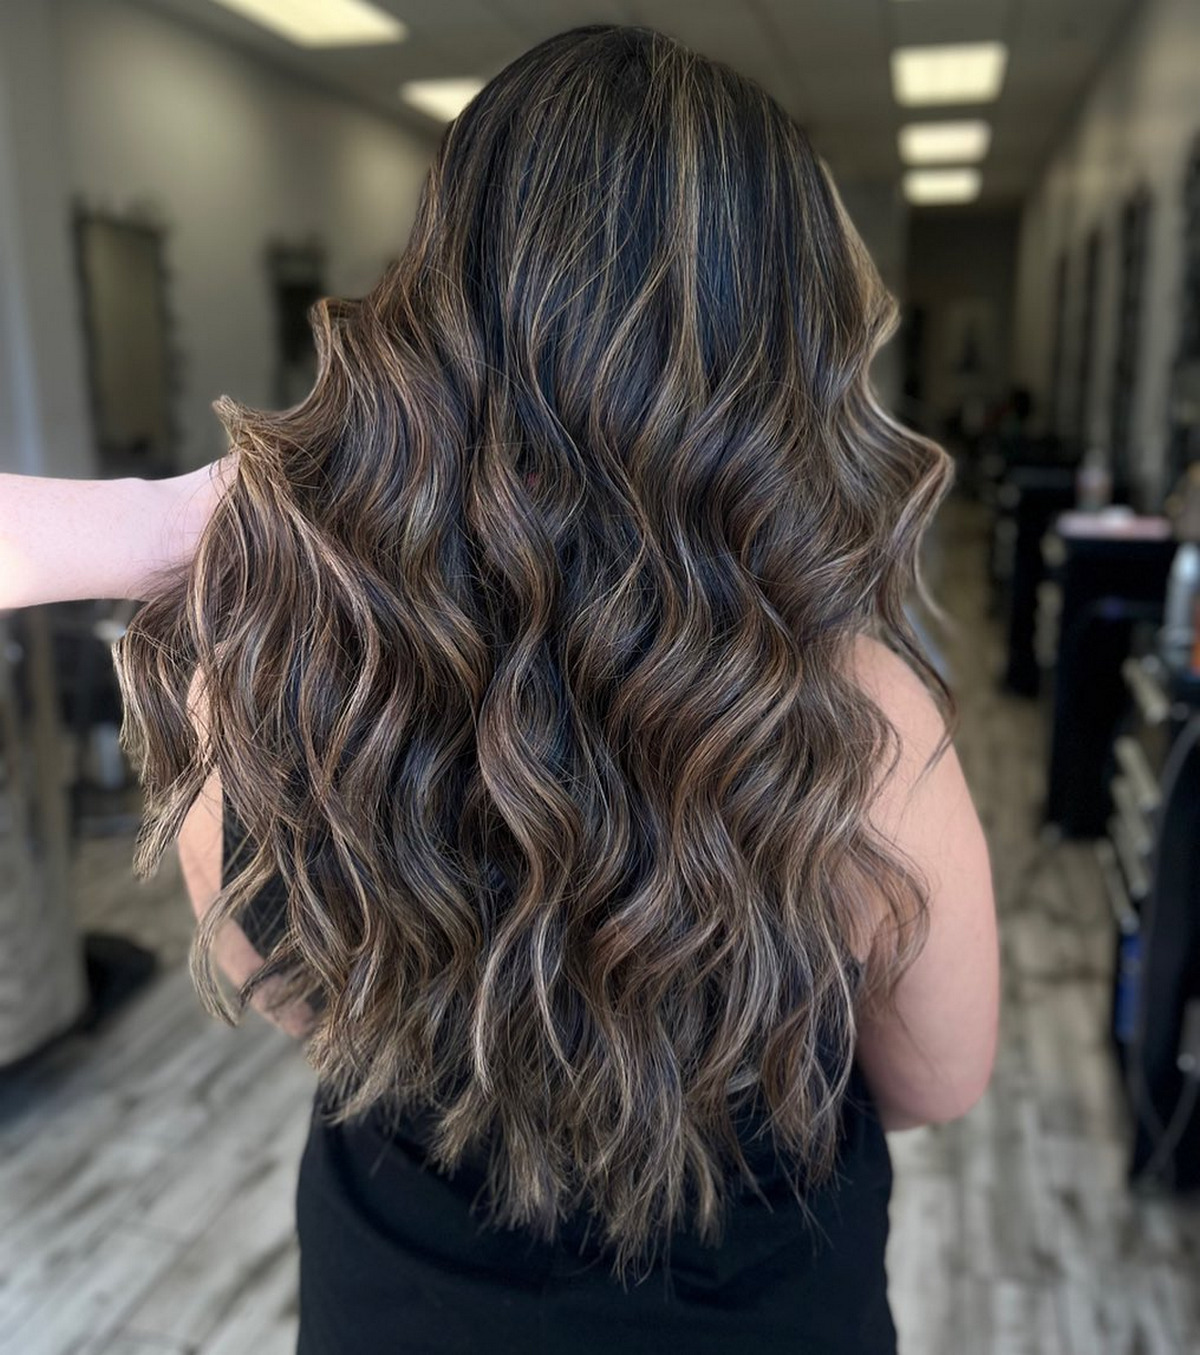 Long Layers Hair With Full Blonde Highlights